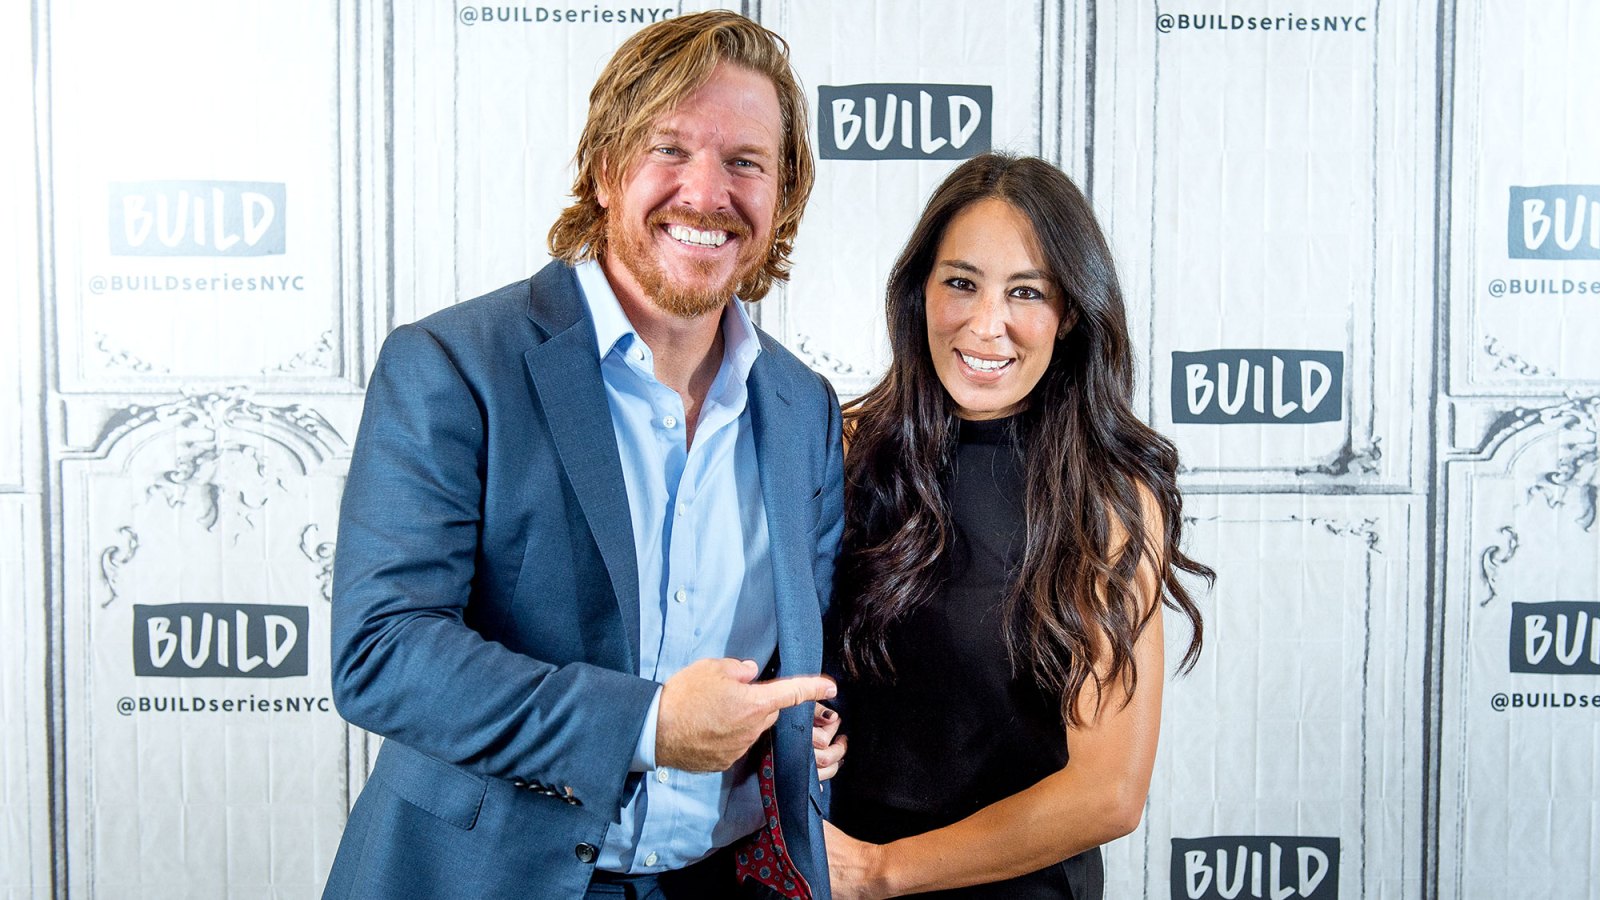 Chip and Joanna Gaines to Open Coffee Shop in Waco: Here’s What to Expect